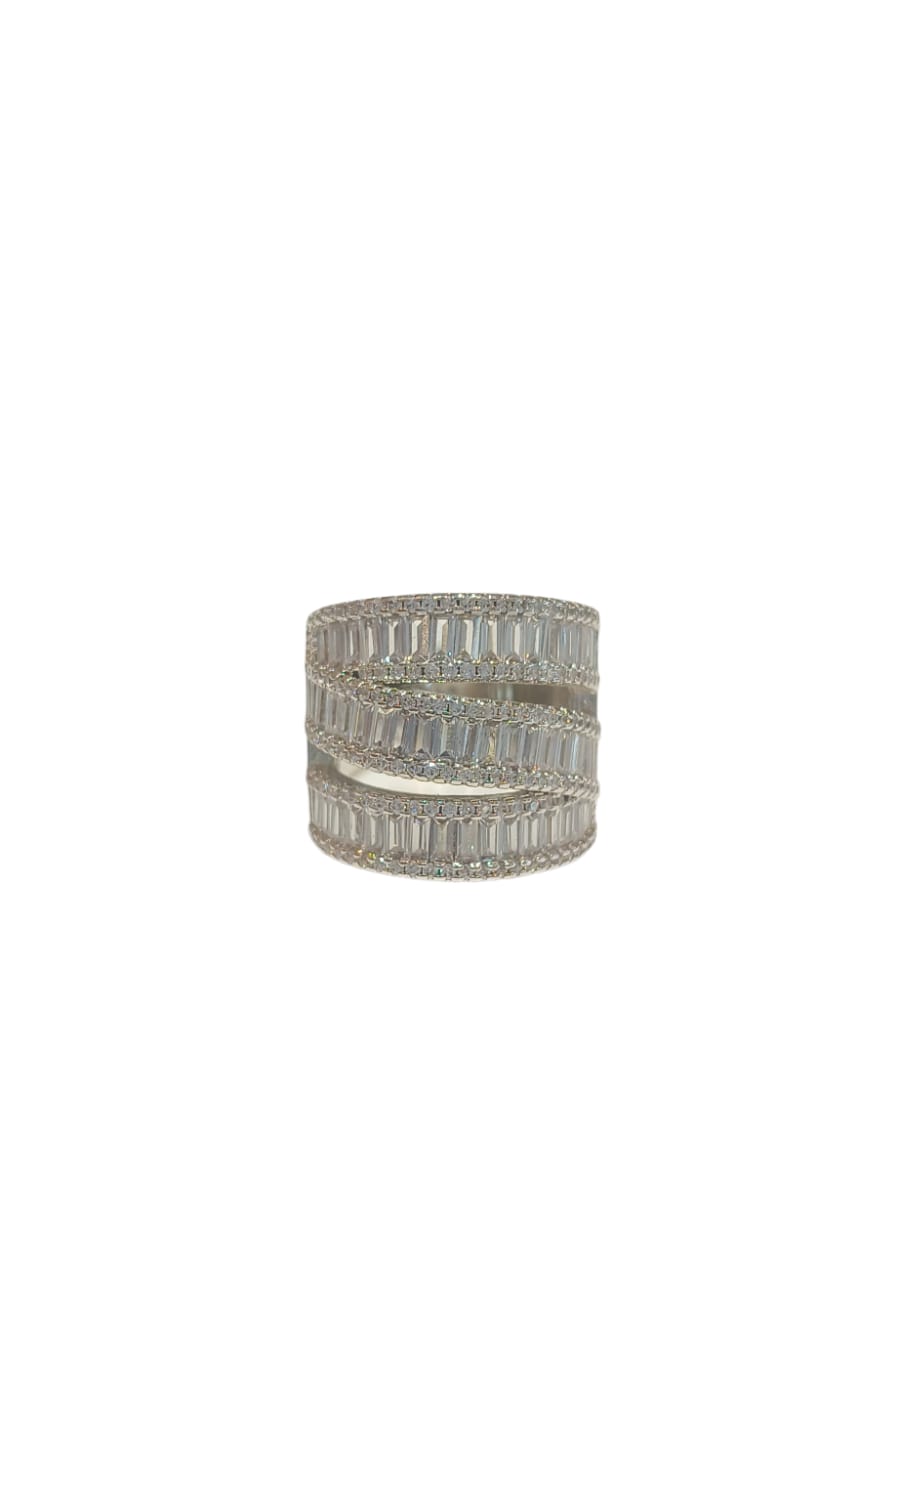 Triple Baguette Band Ring